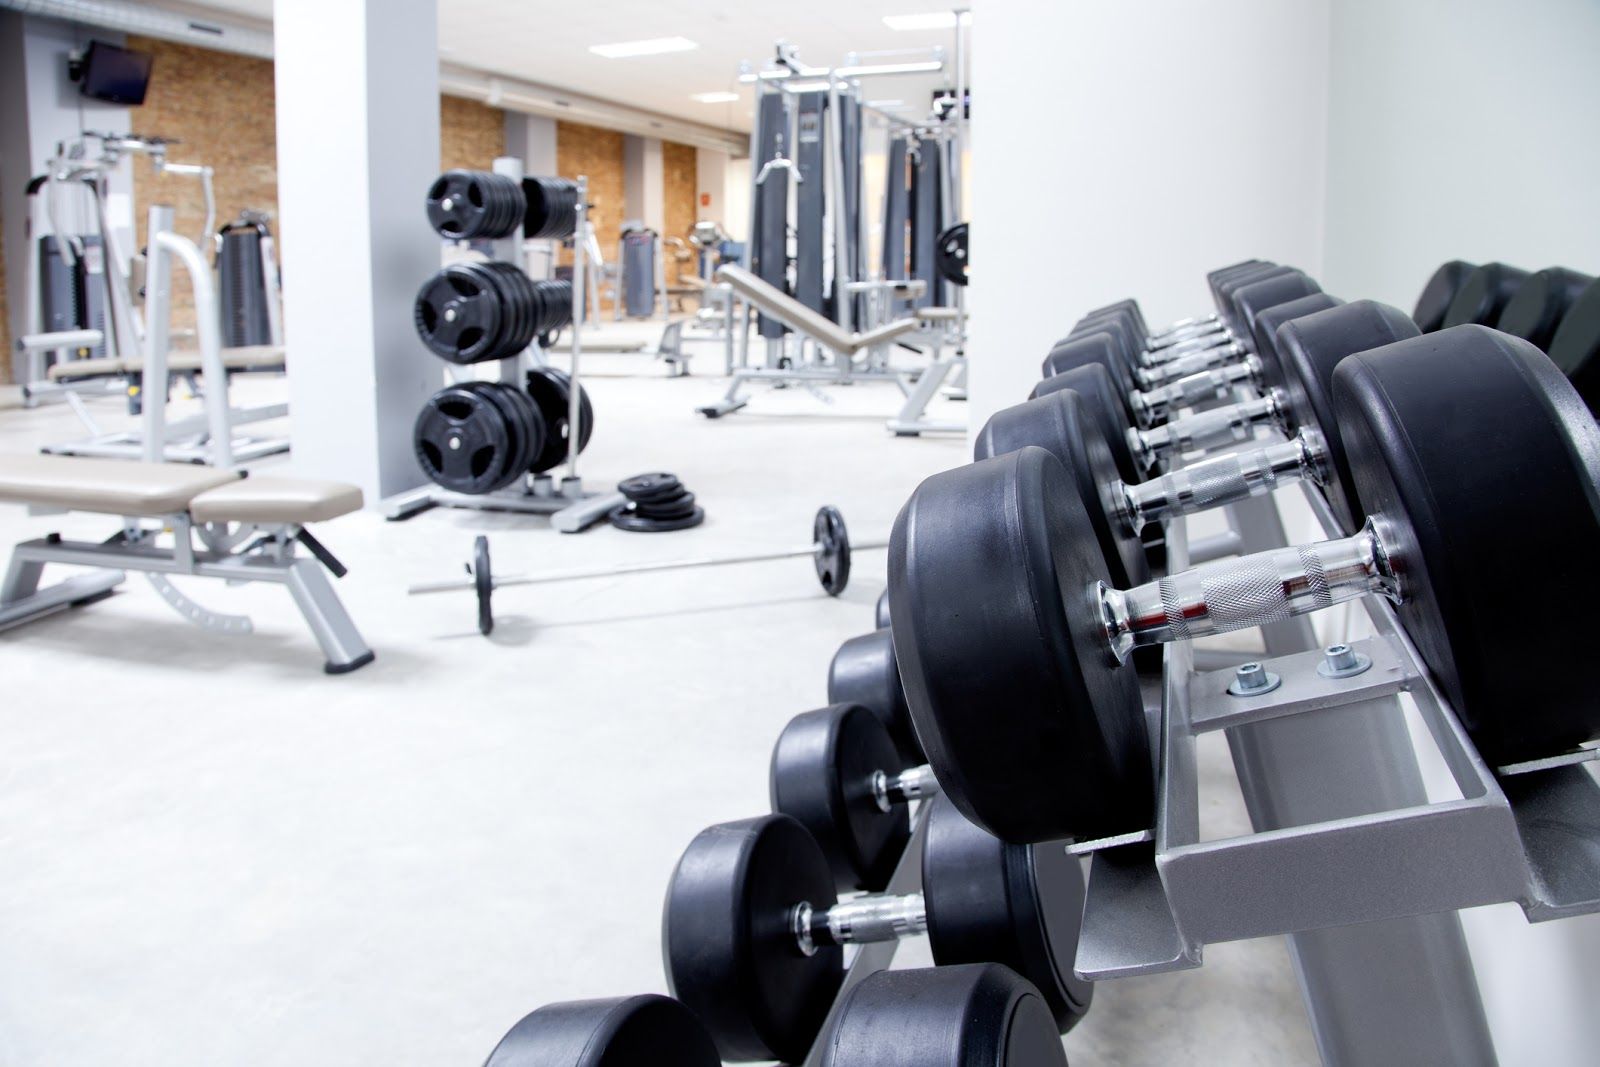 8 things you shouldn't do in the gym